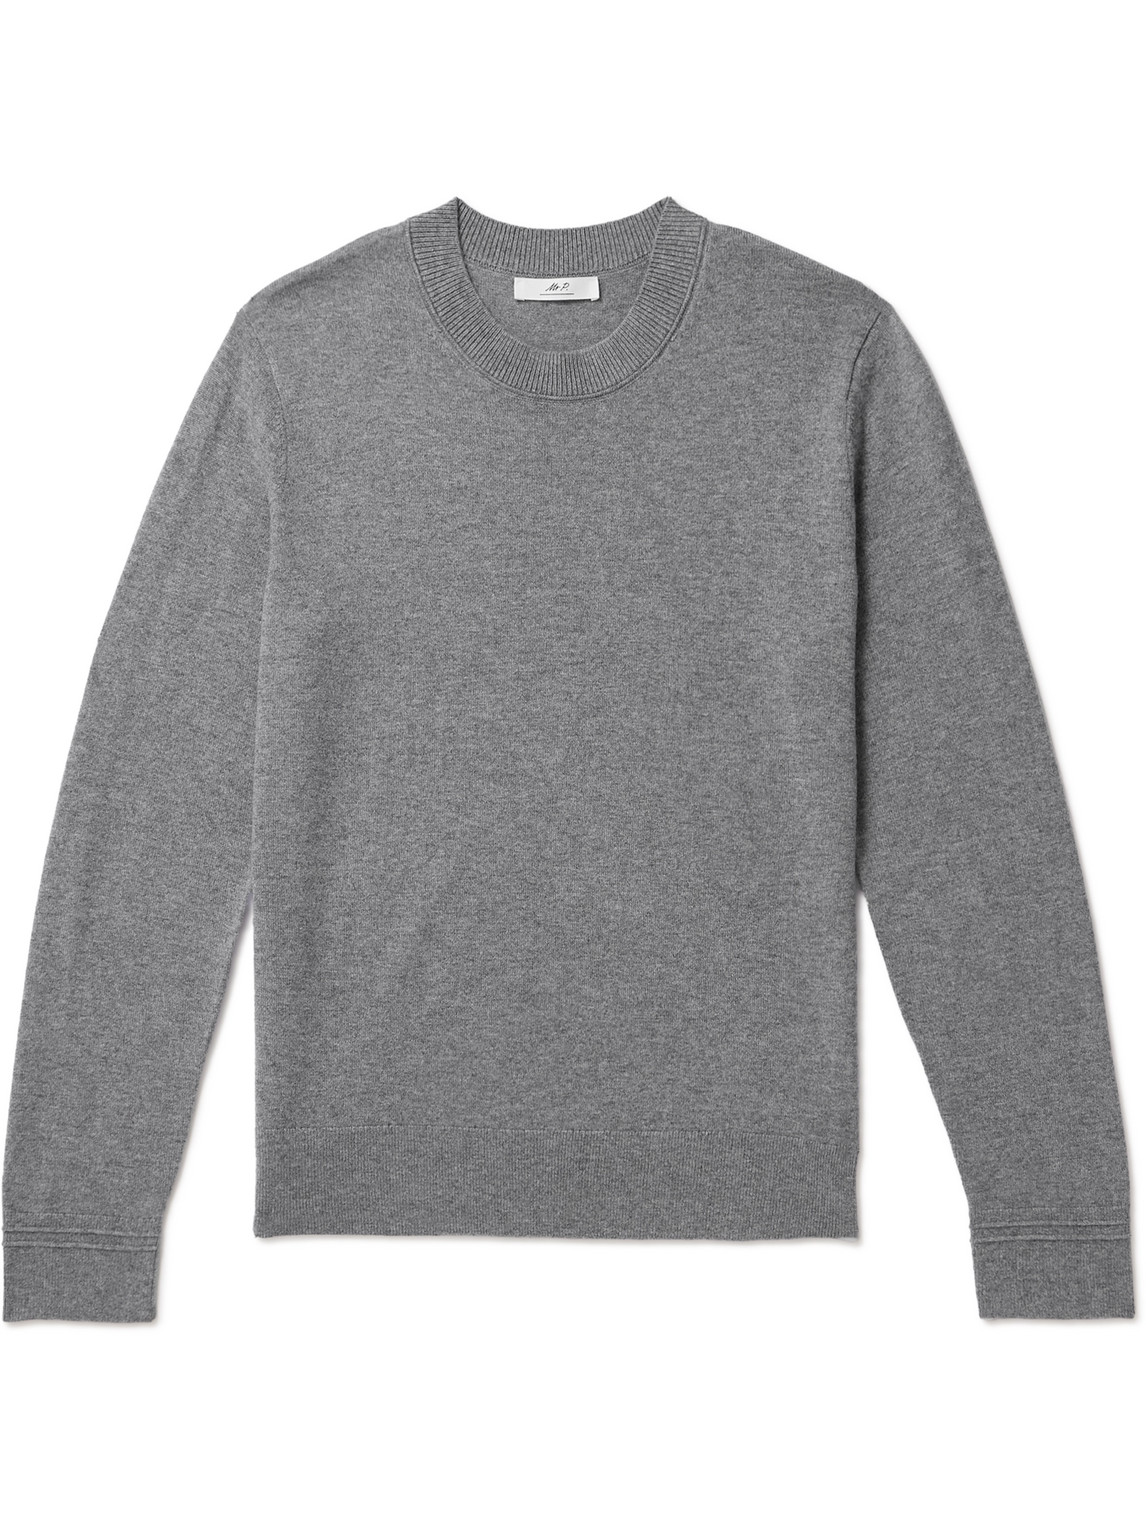 Mr P Curtis Cashmere Sweater In Gray